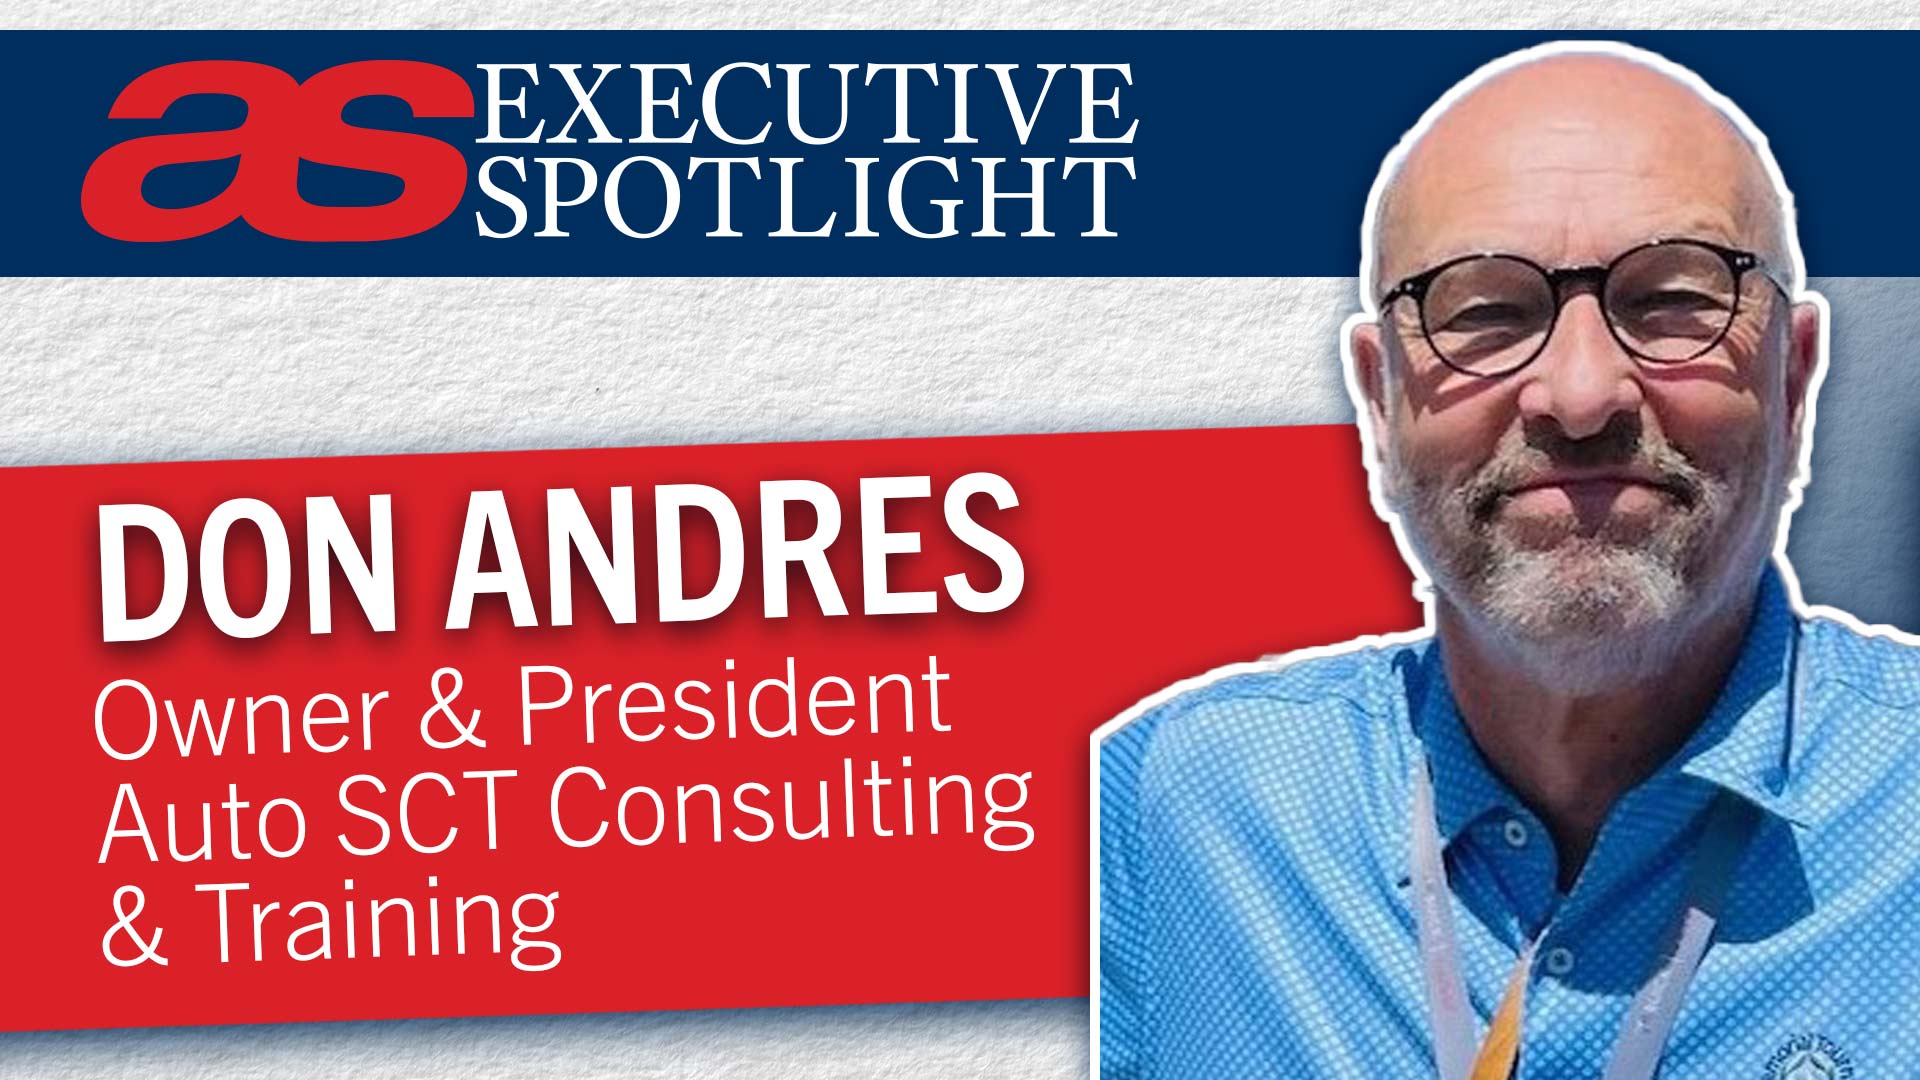 Don Andres, owner and president of Auto SCT Consulting & Training